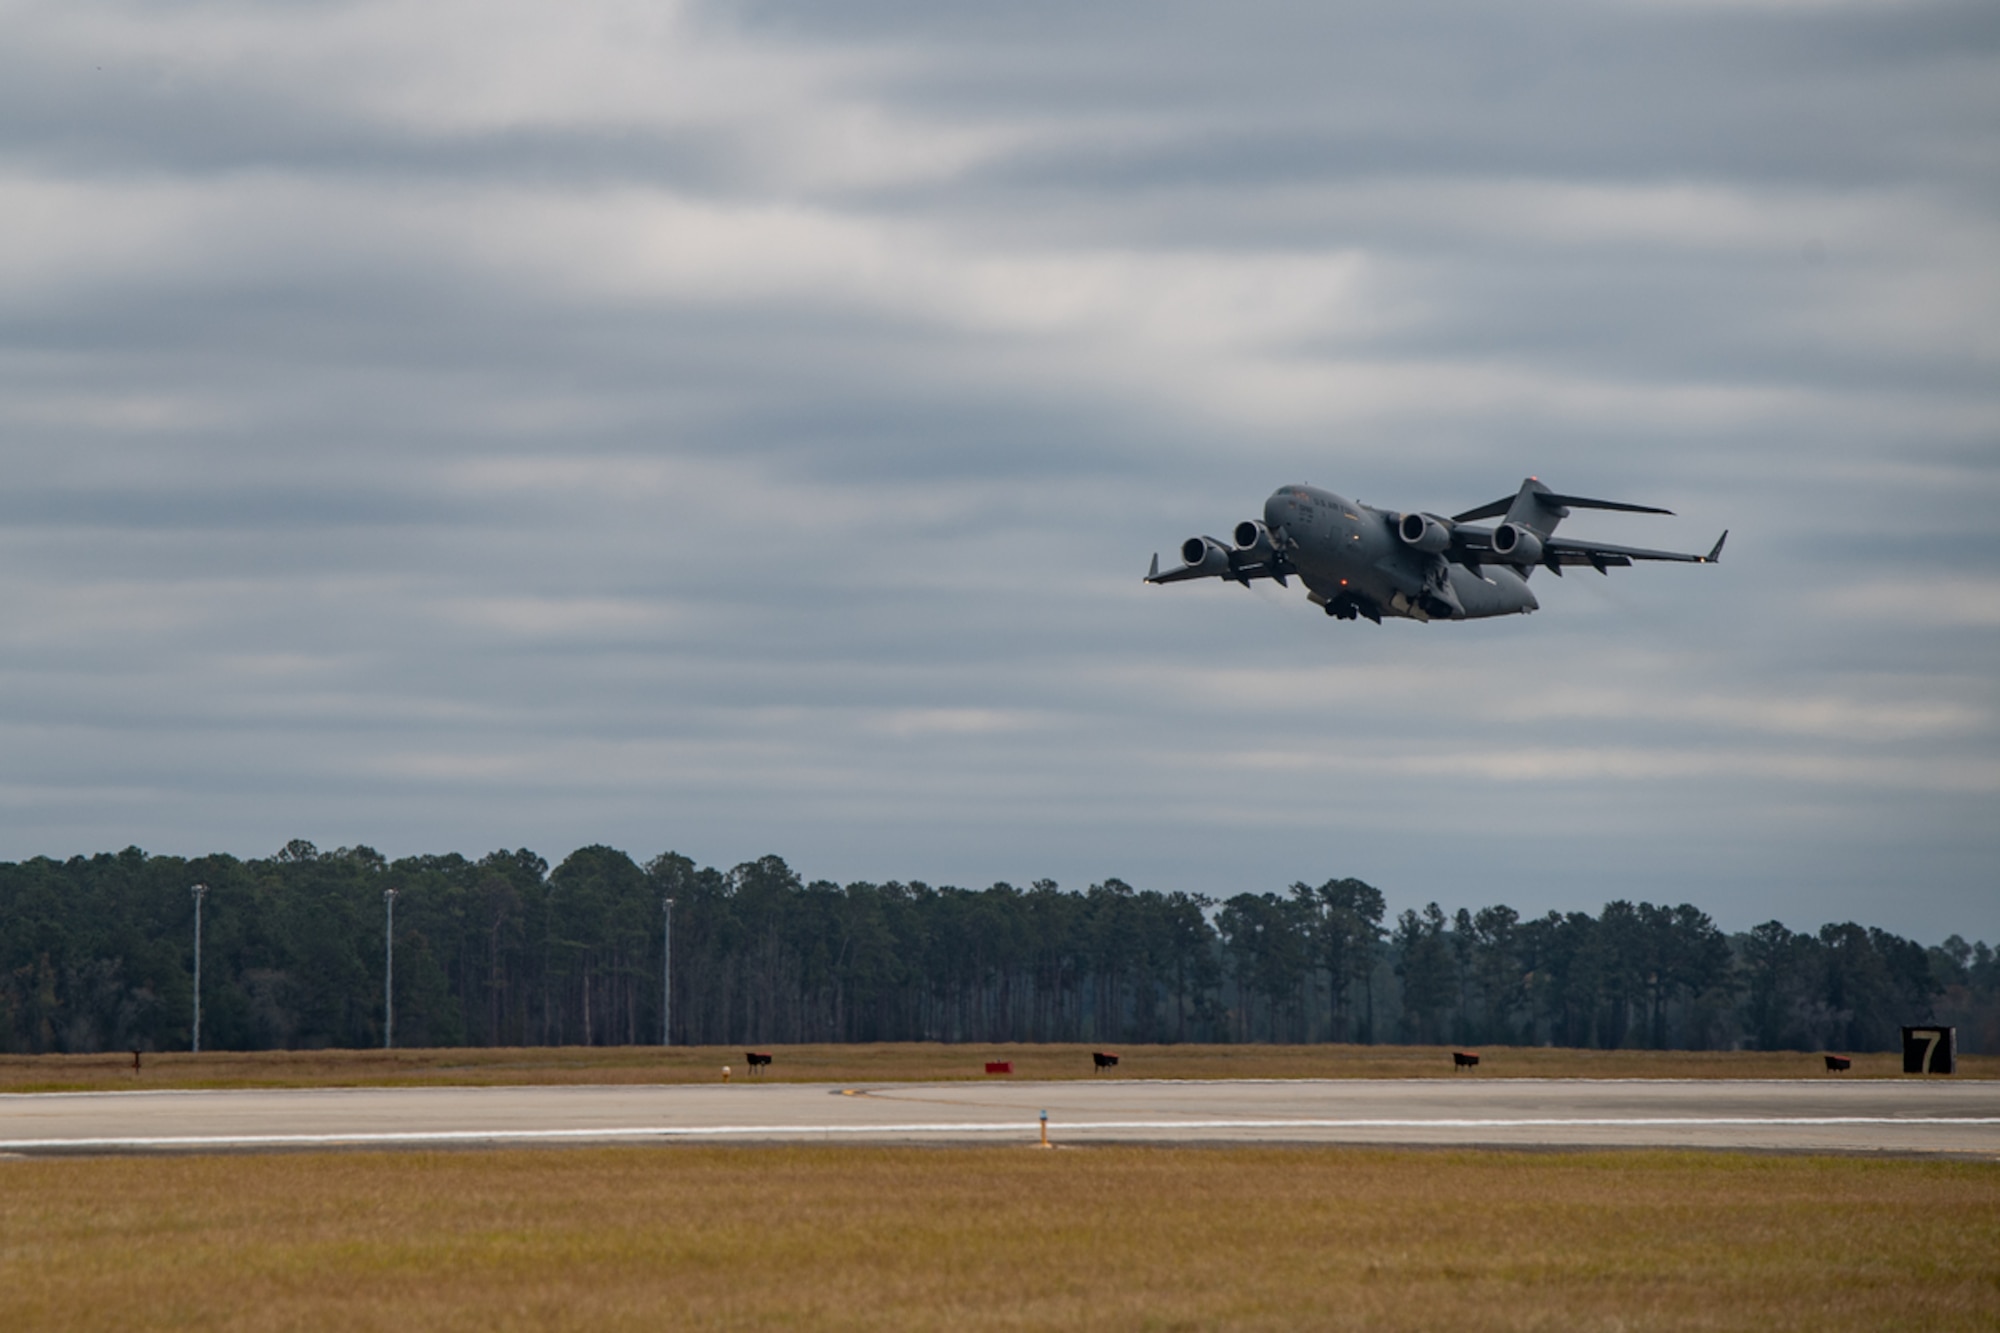 A C-17 takes off from a runway